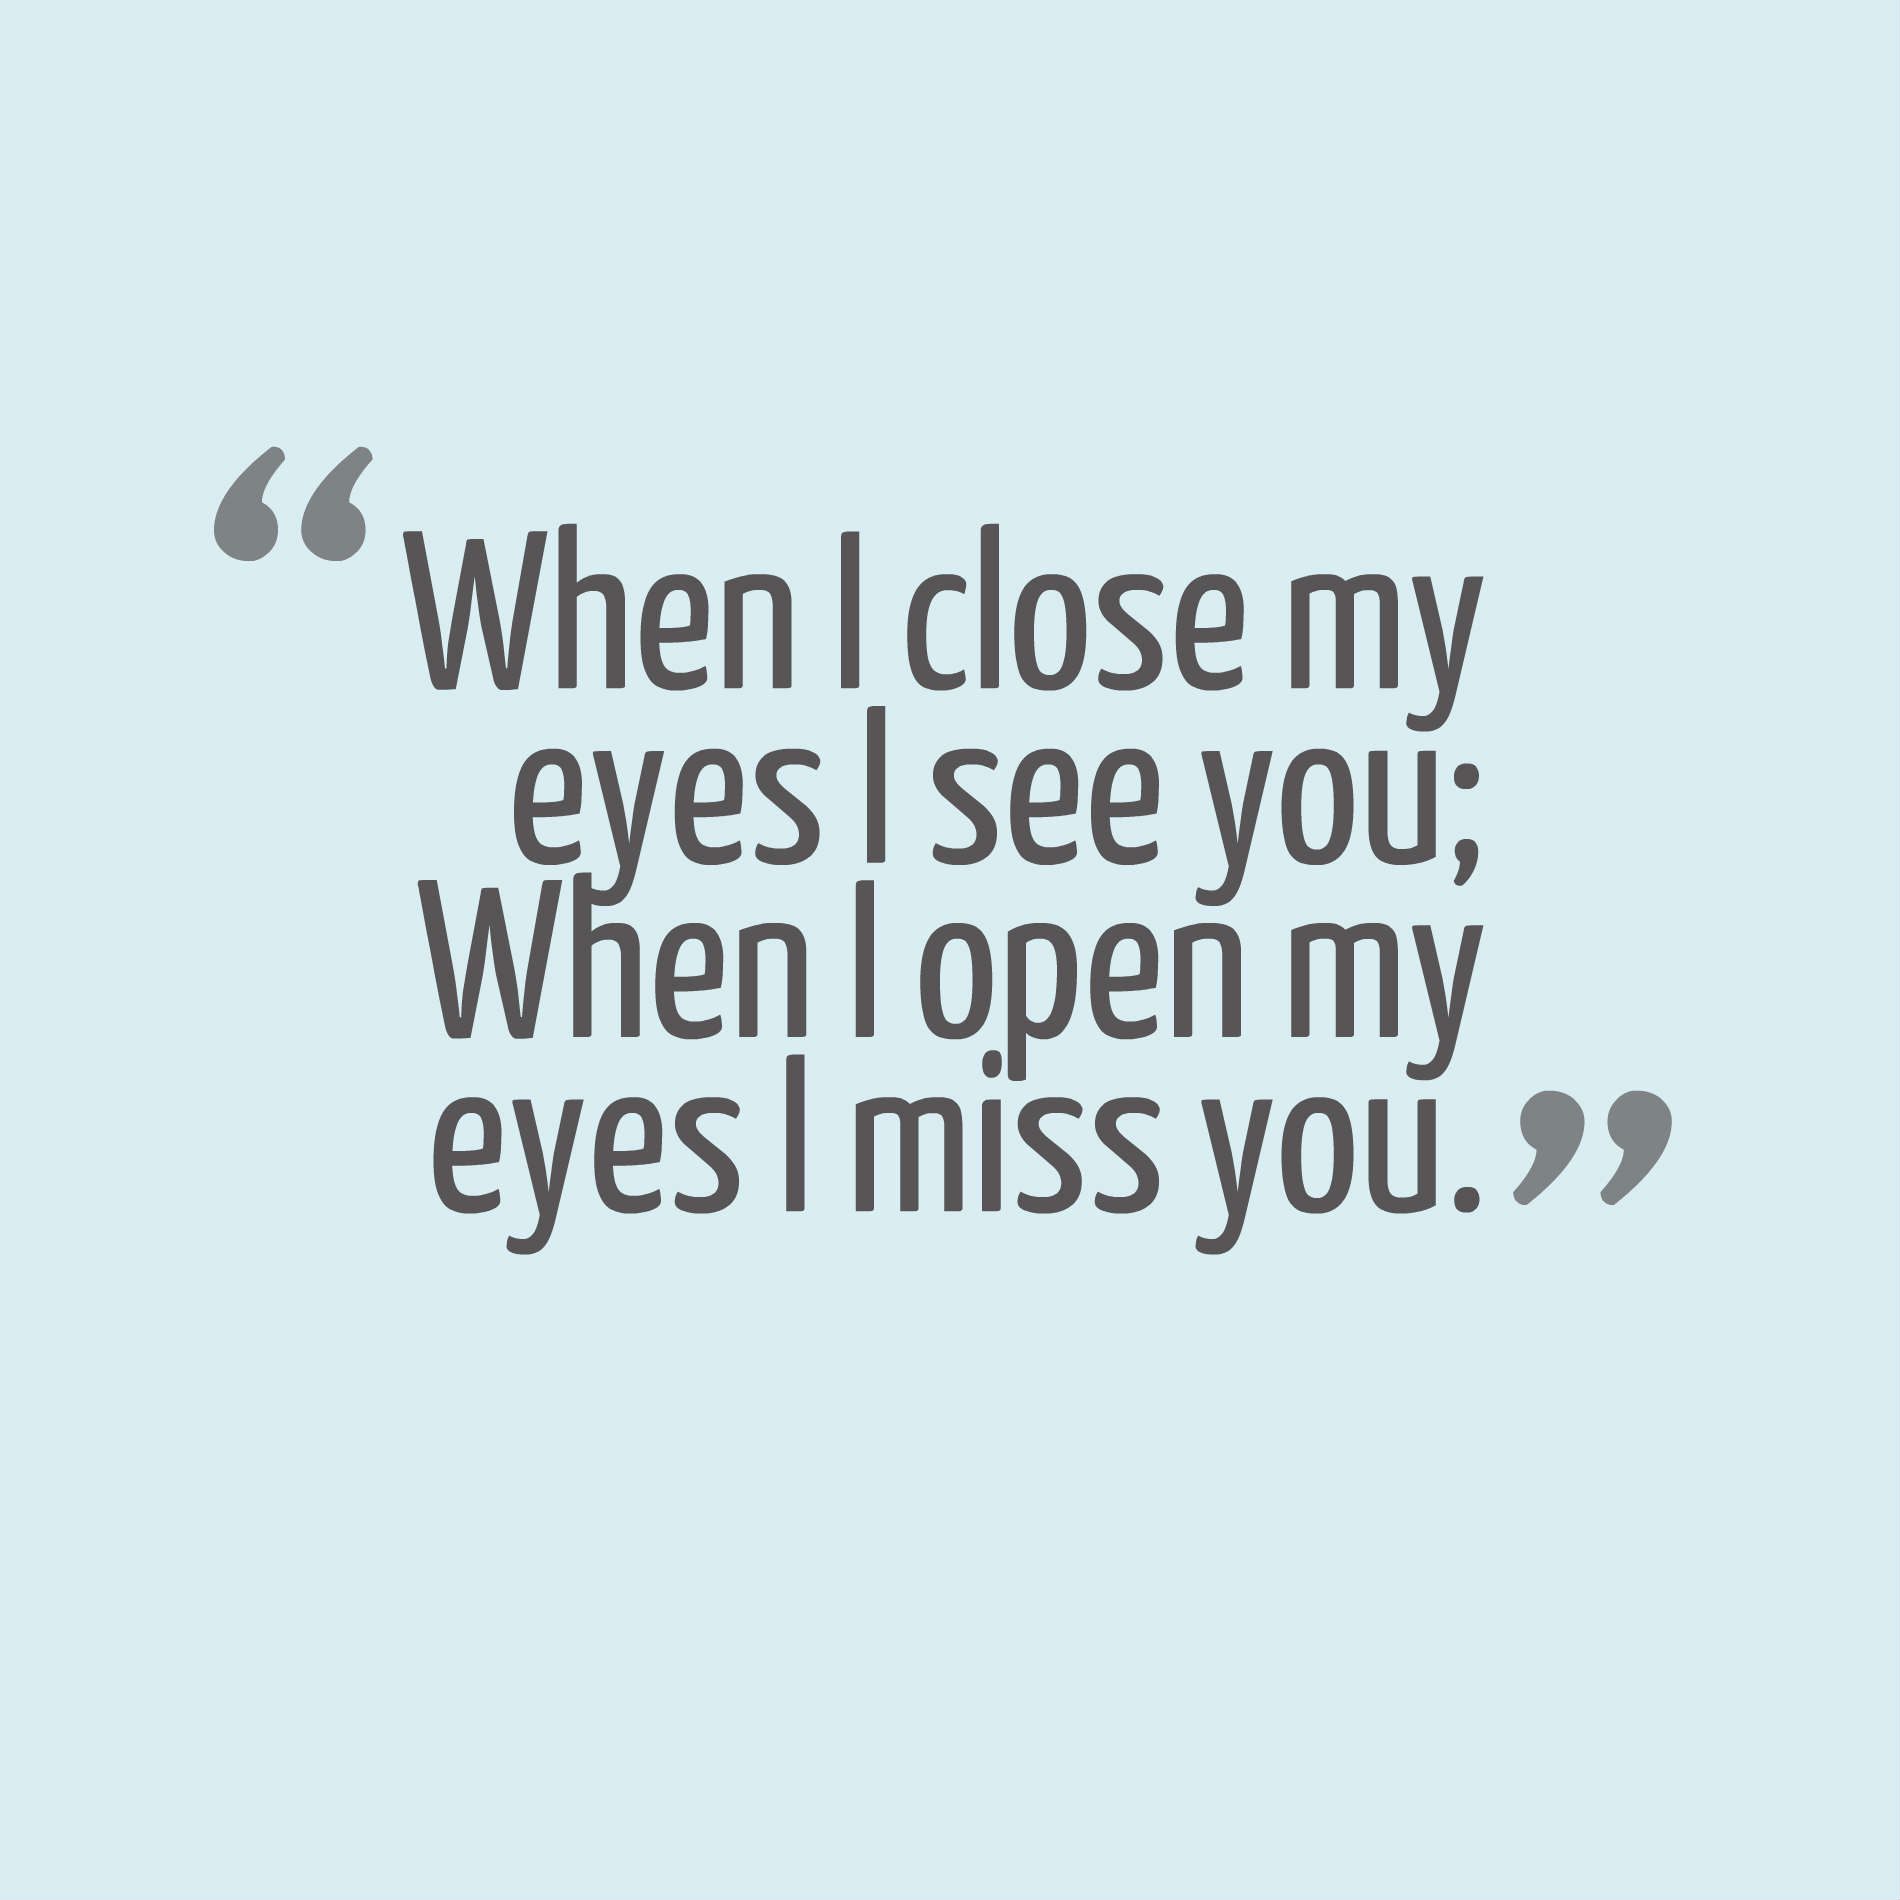 When I close my eyes I see you; When I open my eyes I miss you.